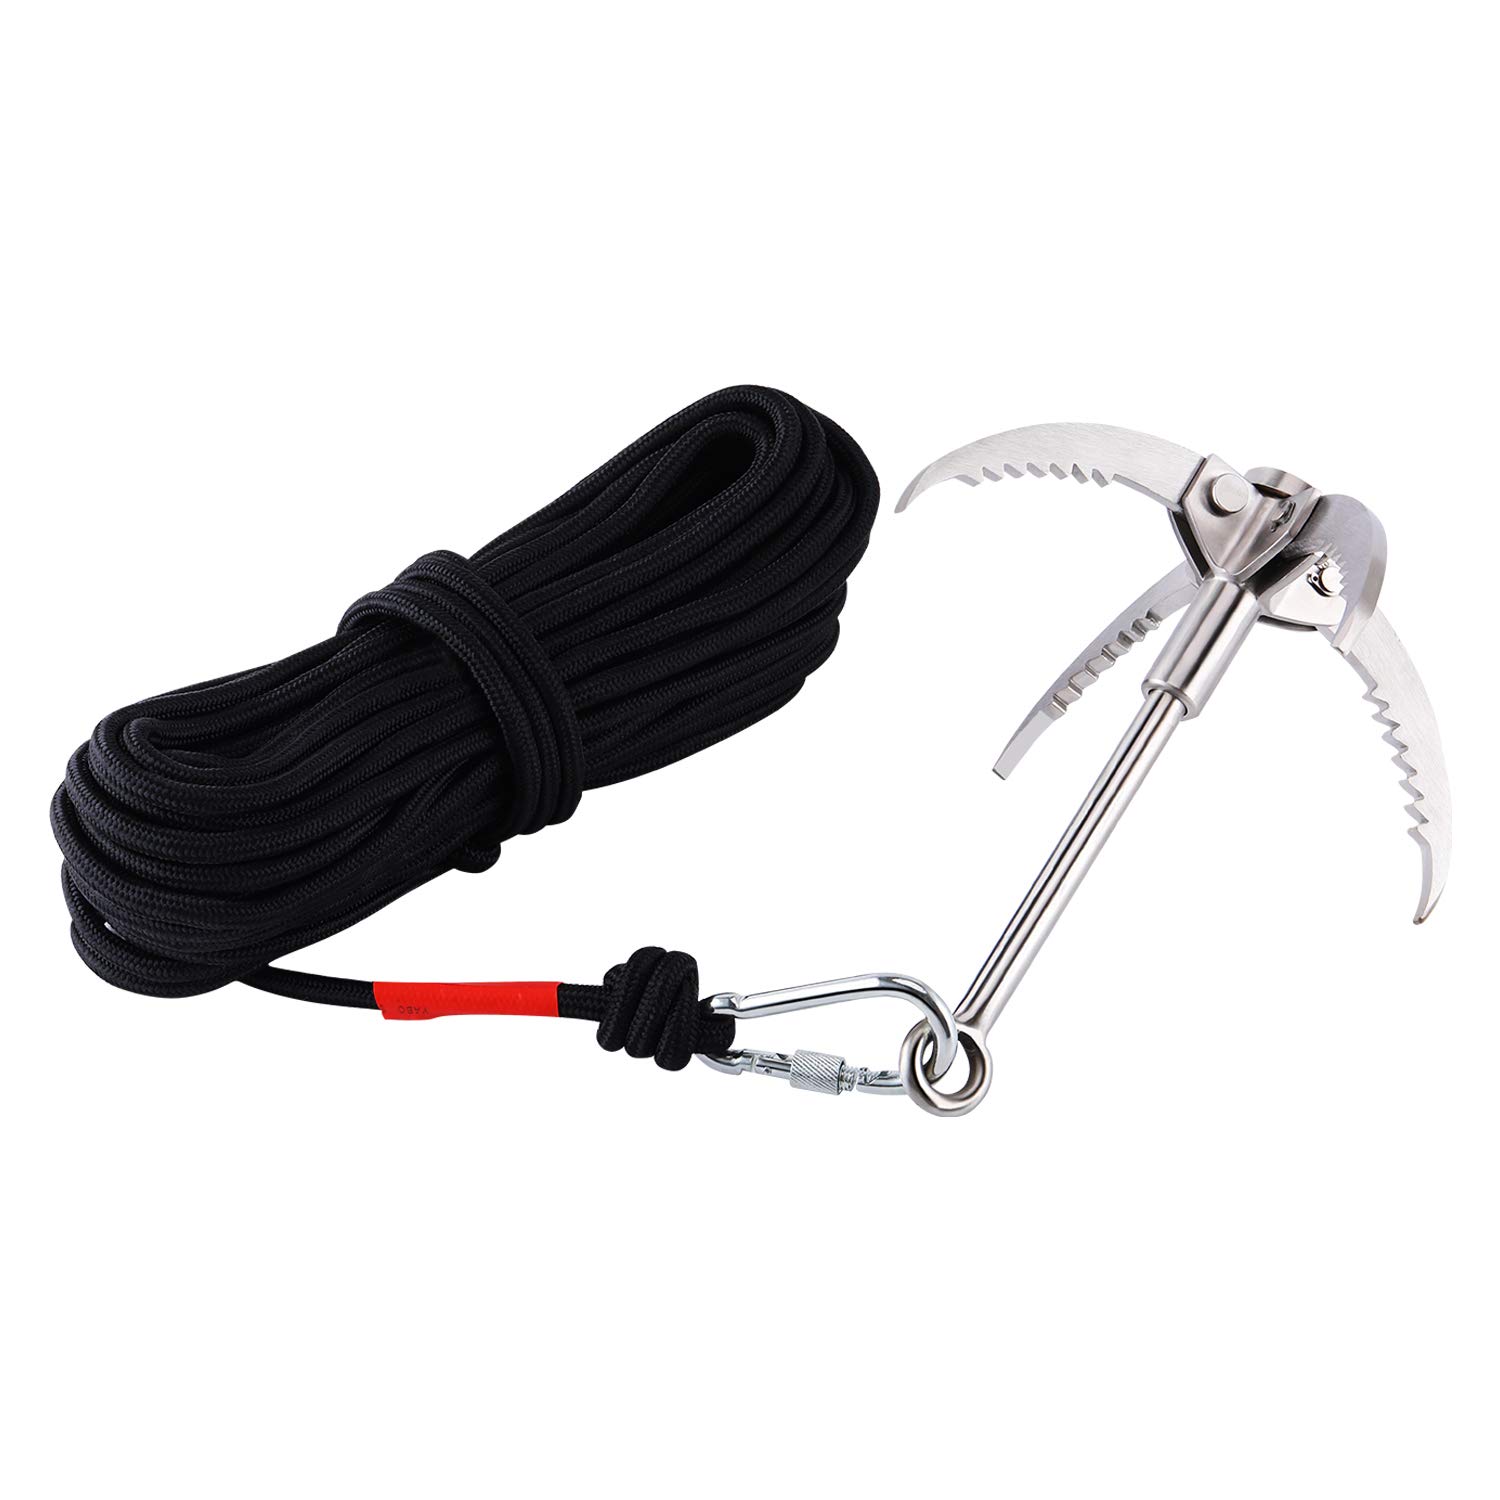 Enrilior for Climbing Grappling Hooks,Stainless Steel Black Gravity Hook  Multifunction Mountaineering Rock Climbing Claw for Outdoor Activities